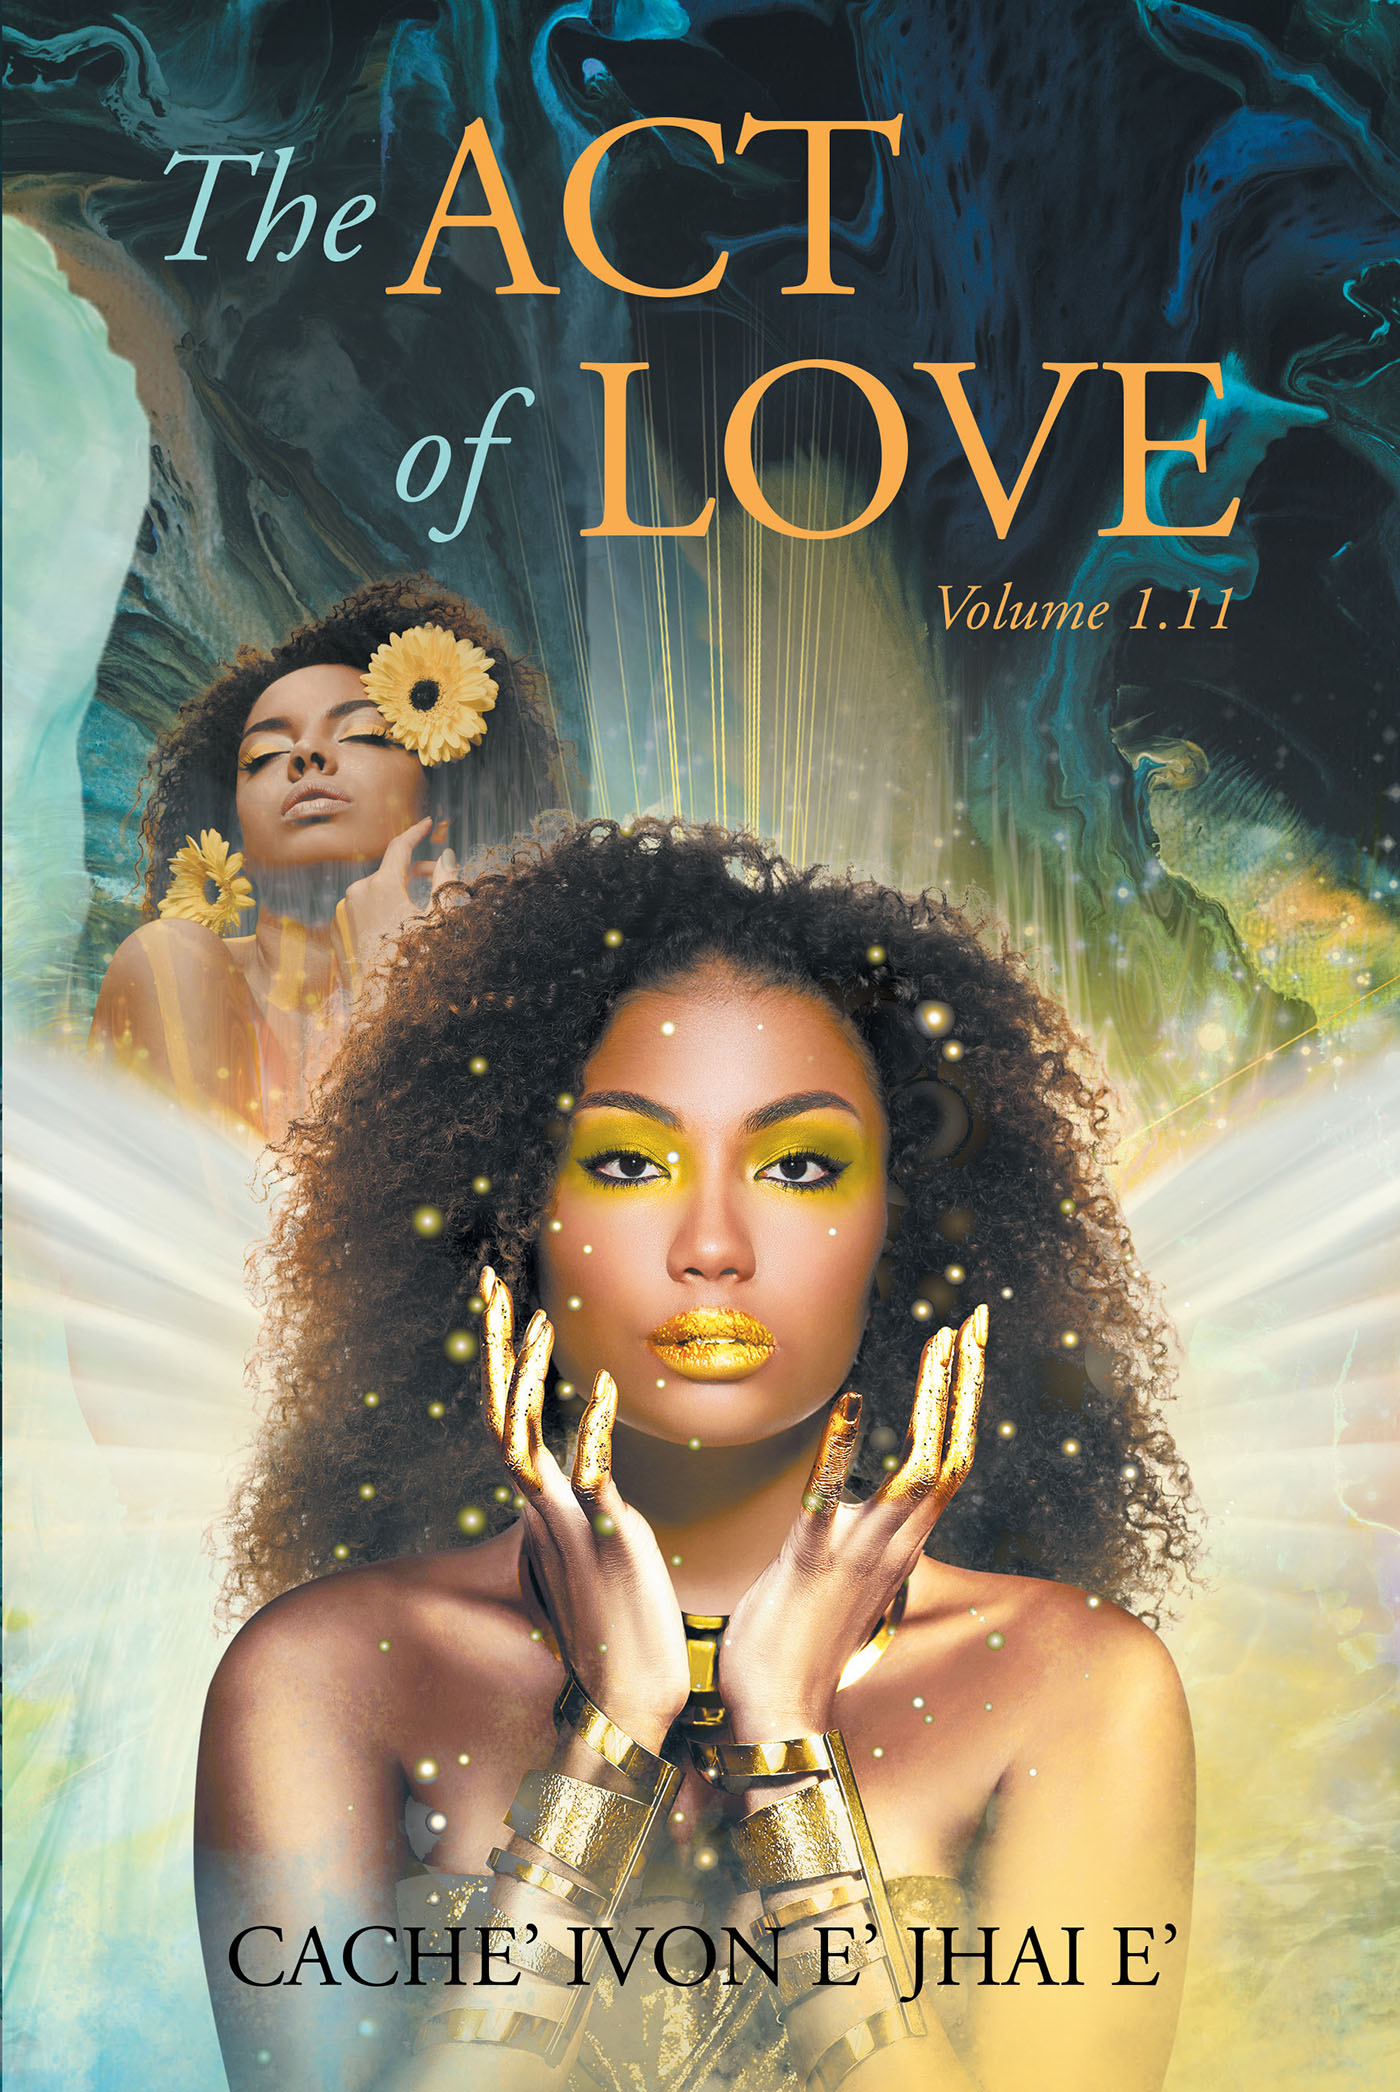 Author Cache' Ivon e' Jhai e's New Book, “The Act of Love: Volume 1.11,” Follows the Ever-Changing and Challenging Life of a Young Woman Blessed with a Unique Gift